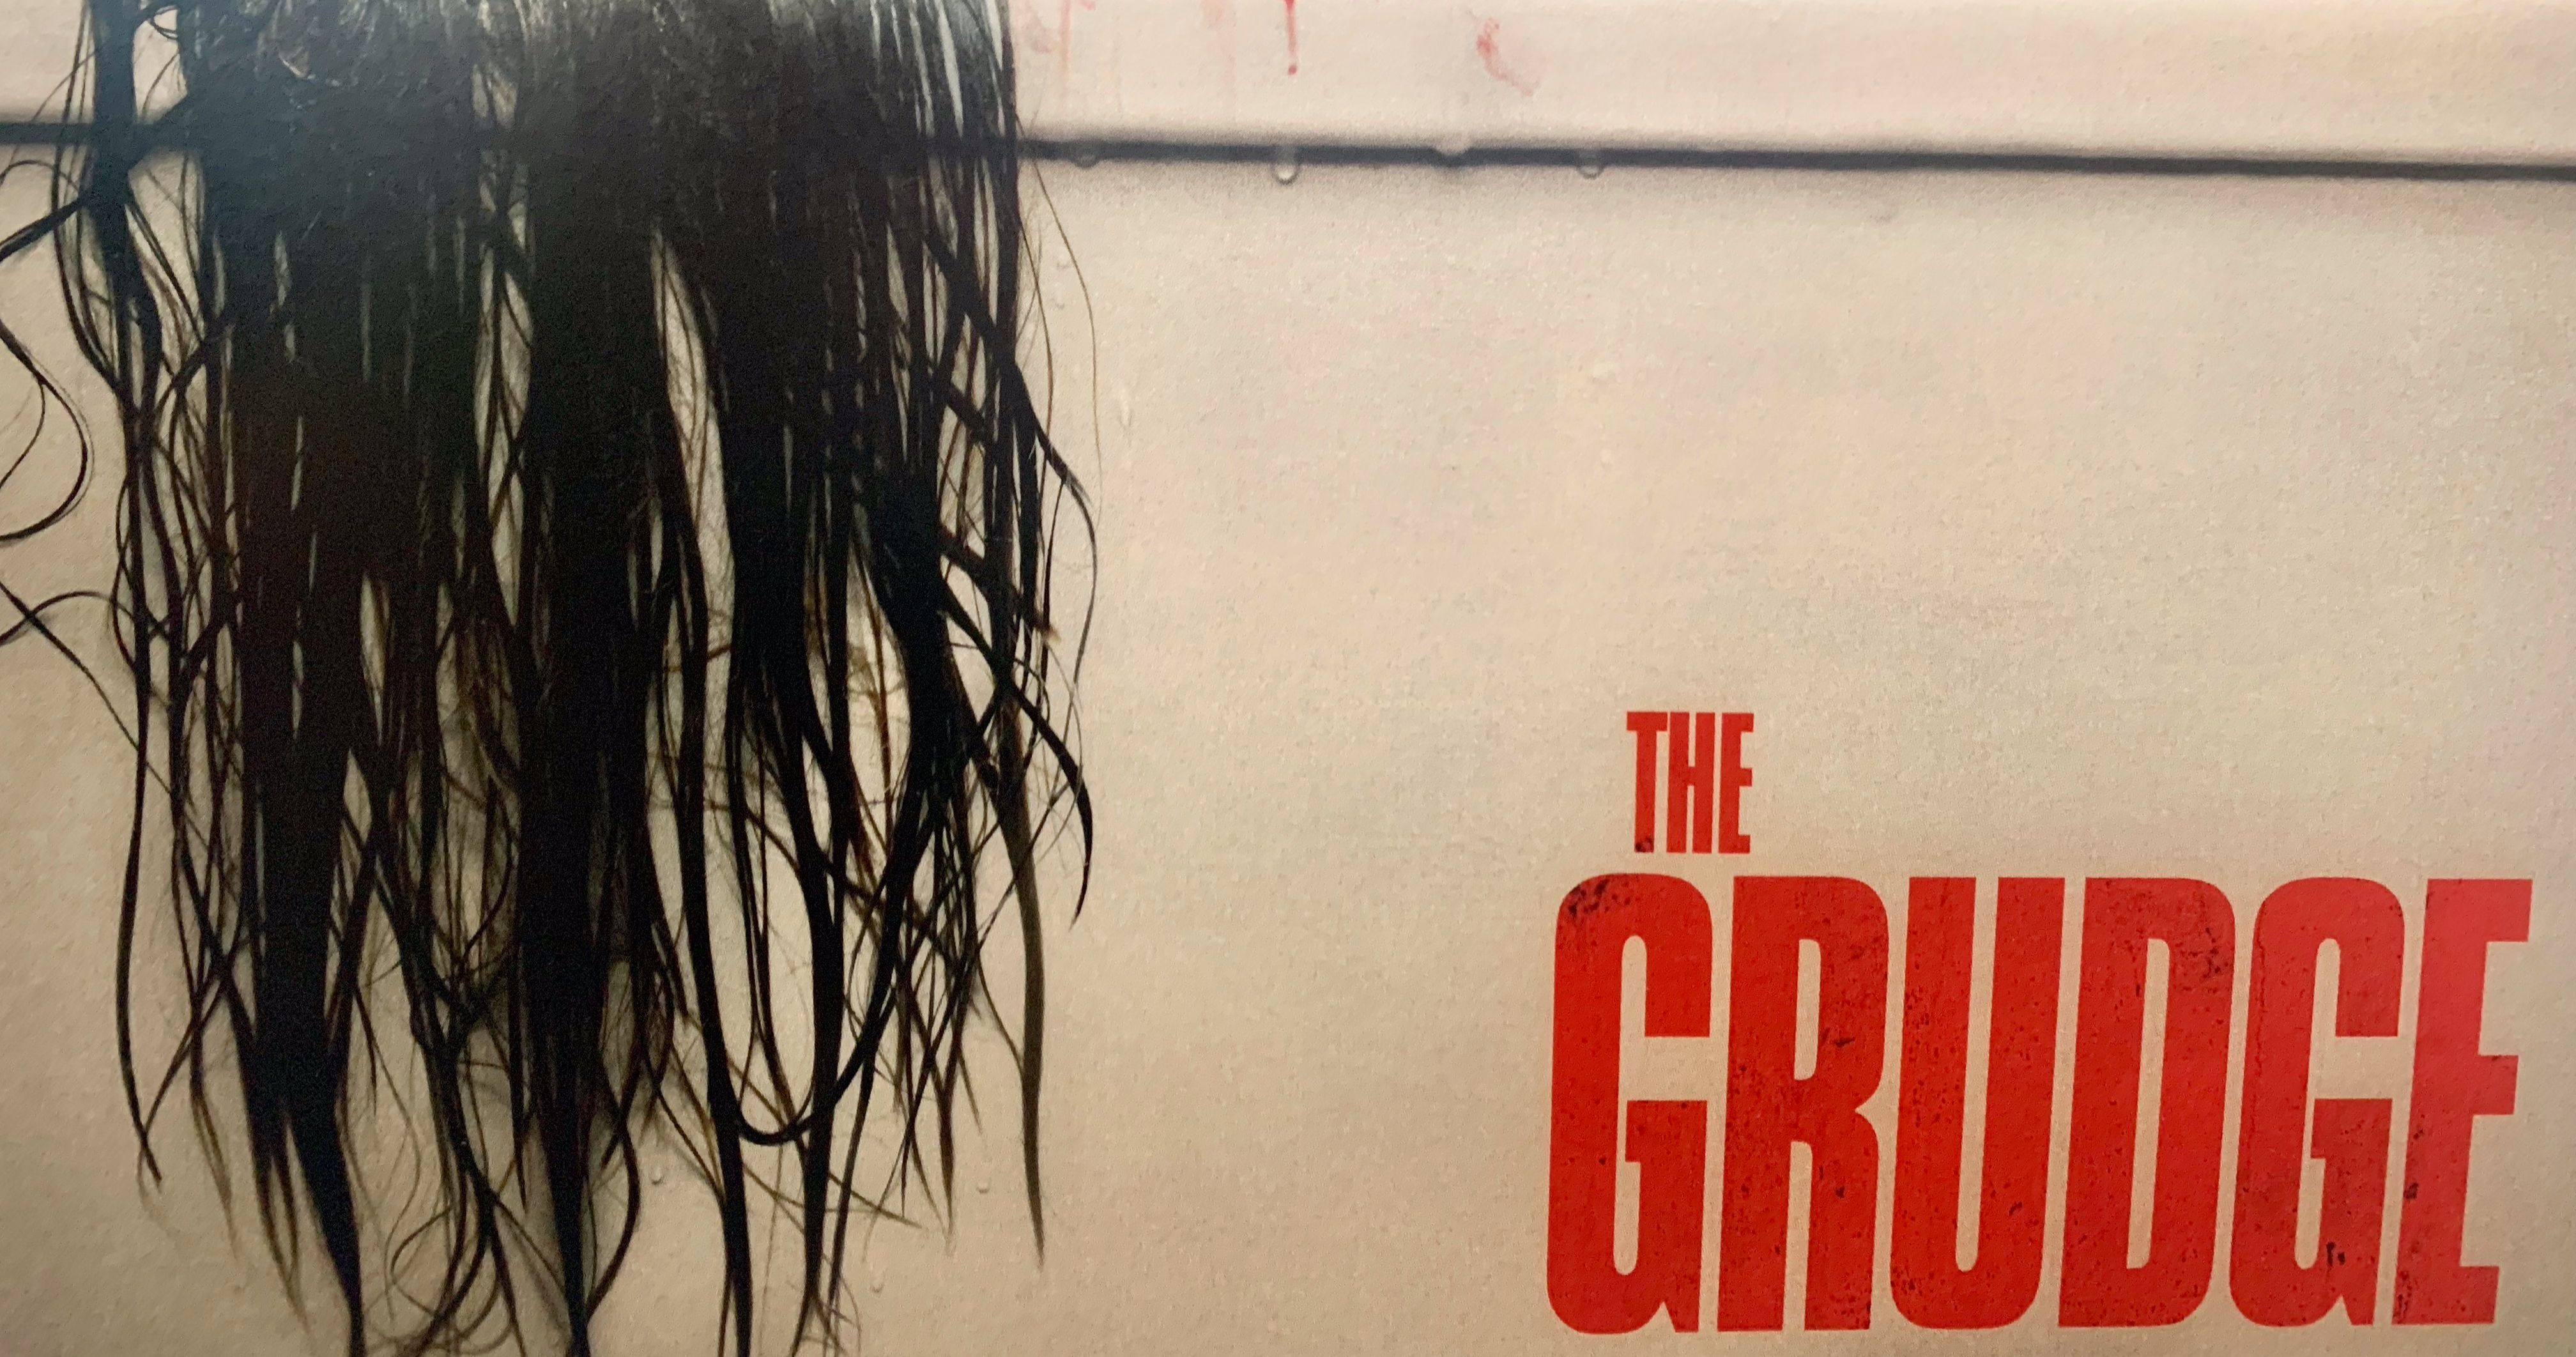 The Grudge Reboot Poster Gets Creepy in the Bathtub with an Iconic Ghost